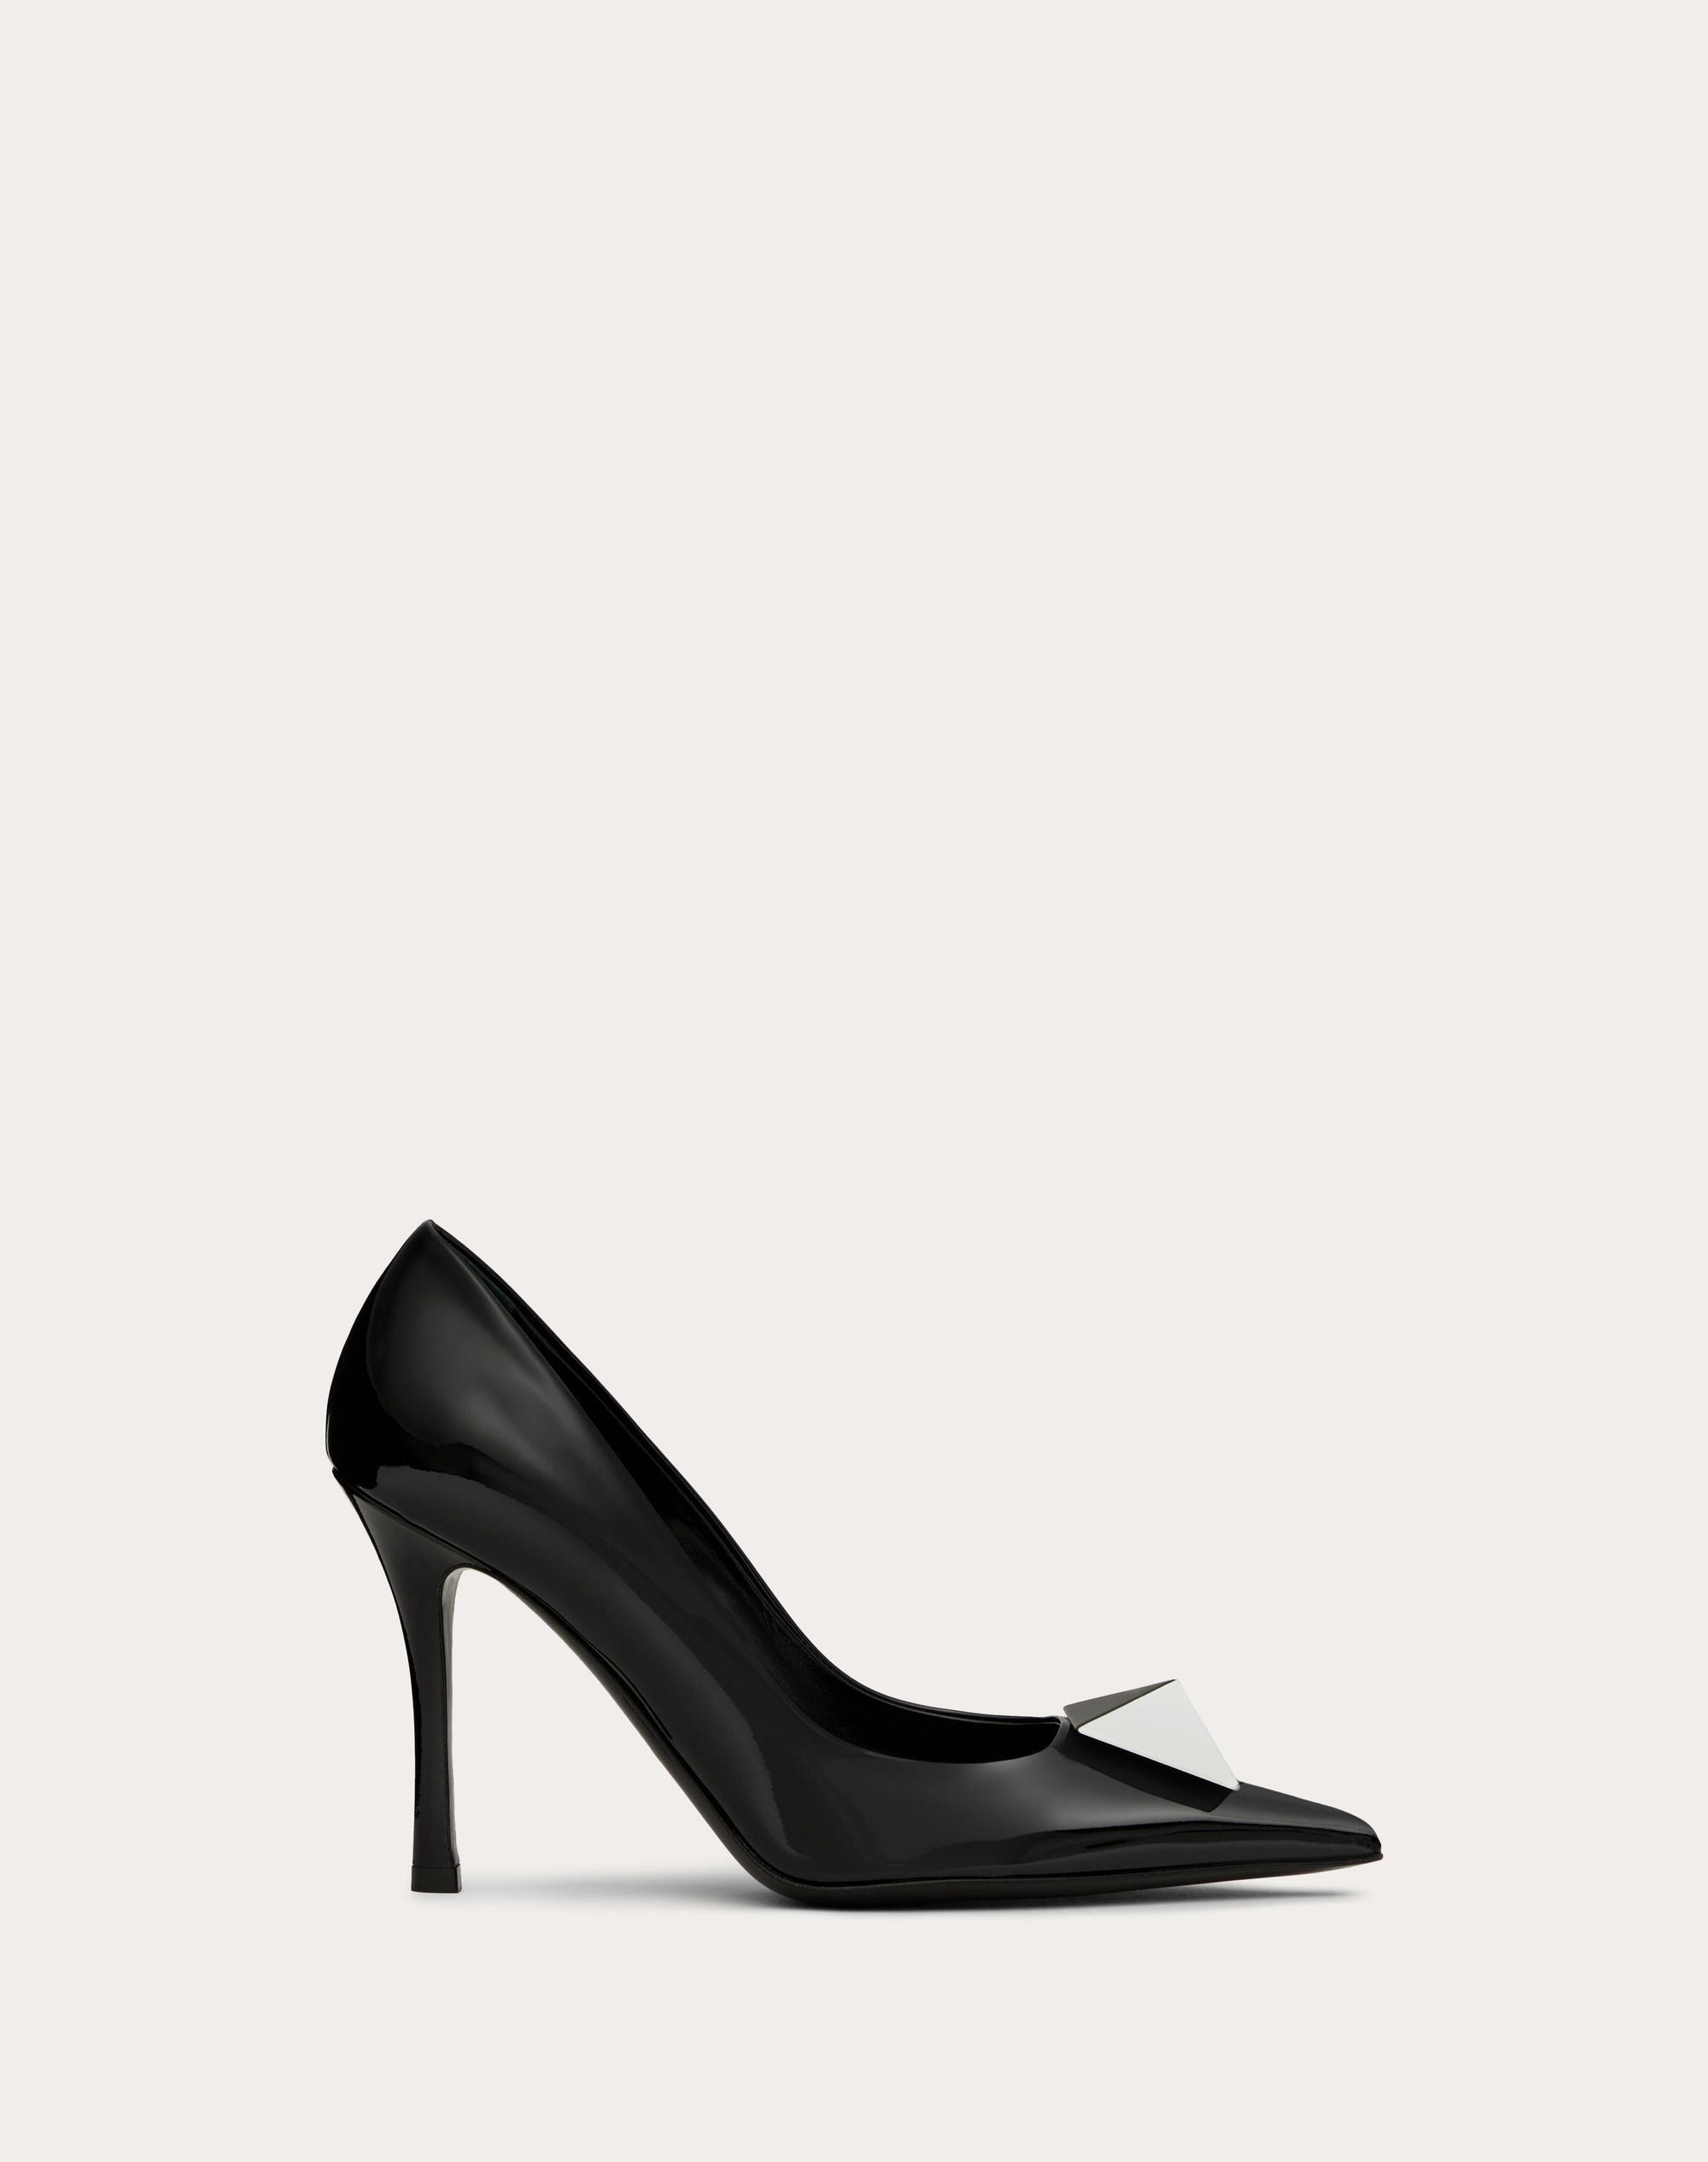 ONE STUD PATENT LEATHER PUMP AND TWO-TONE STUD 100MM - 1